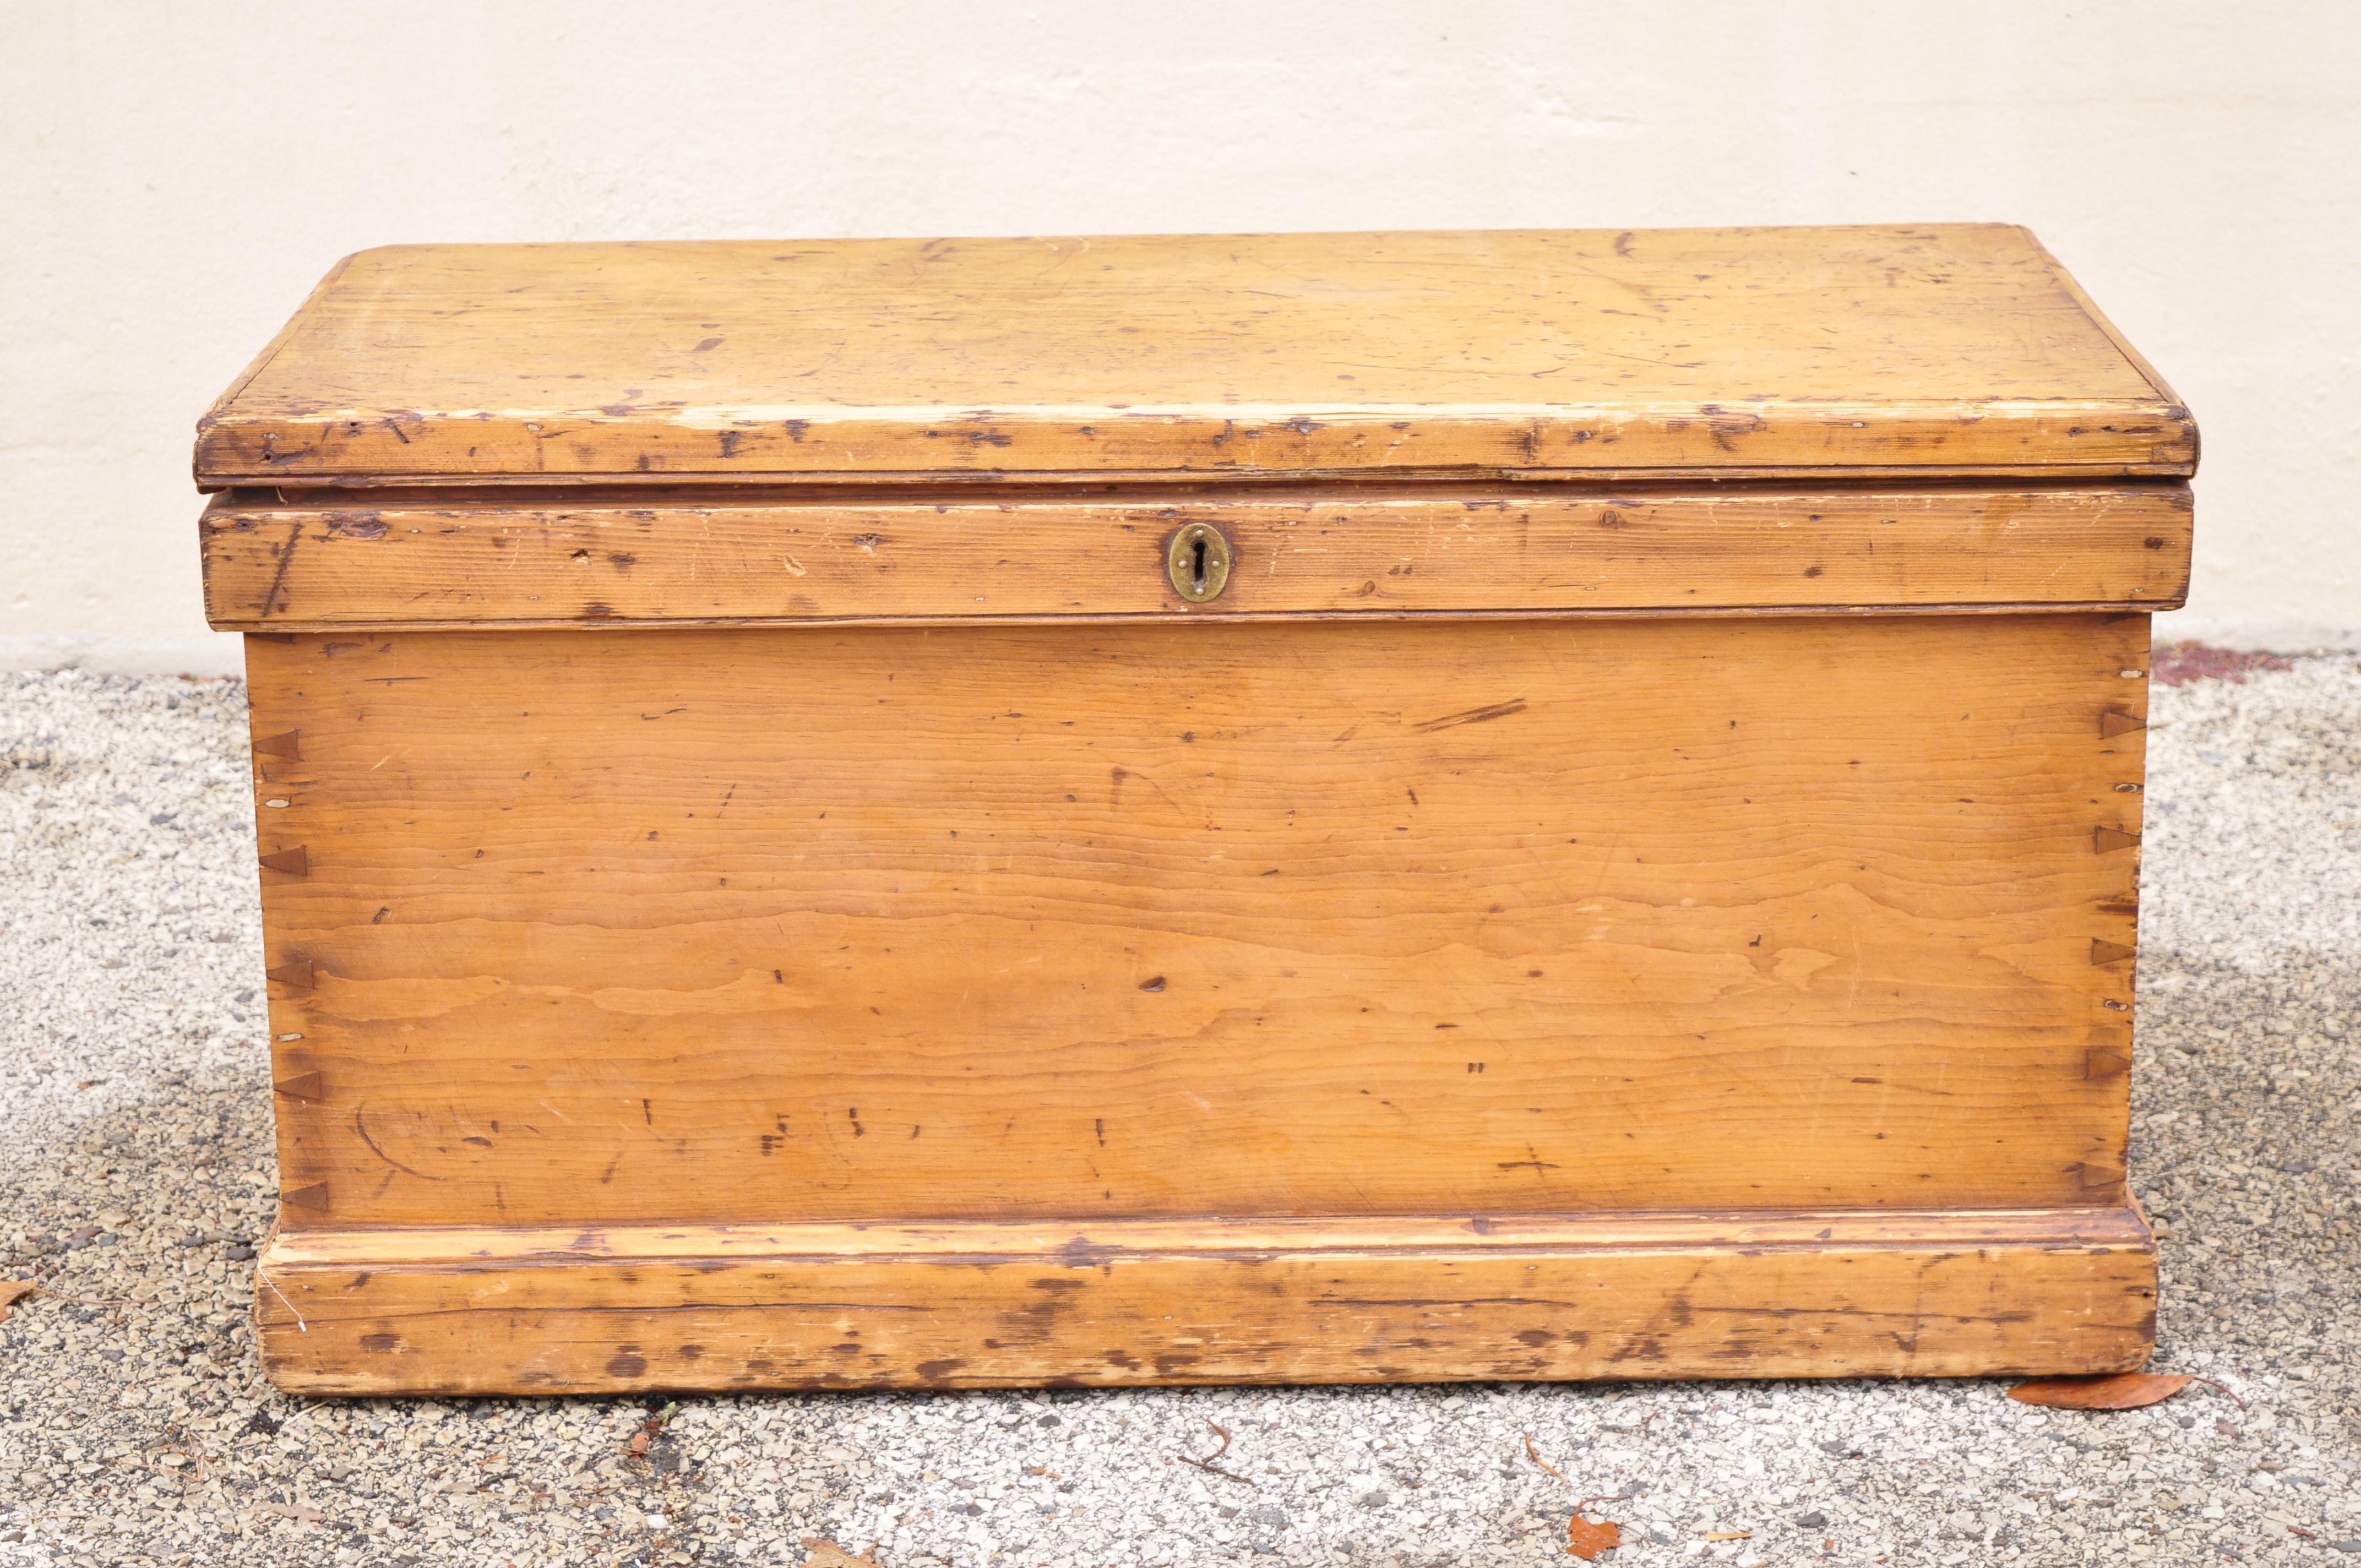 19th Century antique rustic chestnut wood wooden dovetail blanket chest trunk. Item features cast iron hardware, dovetail construction, small drawers and flip storage to inside, solid wood construction, distressed finish, very nice antique item,